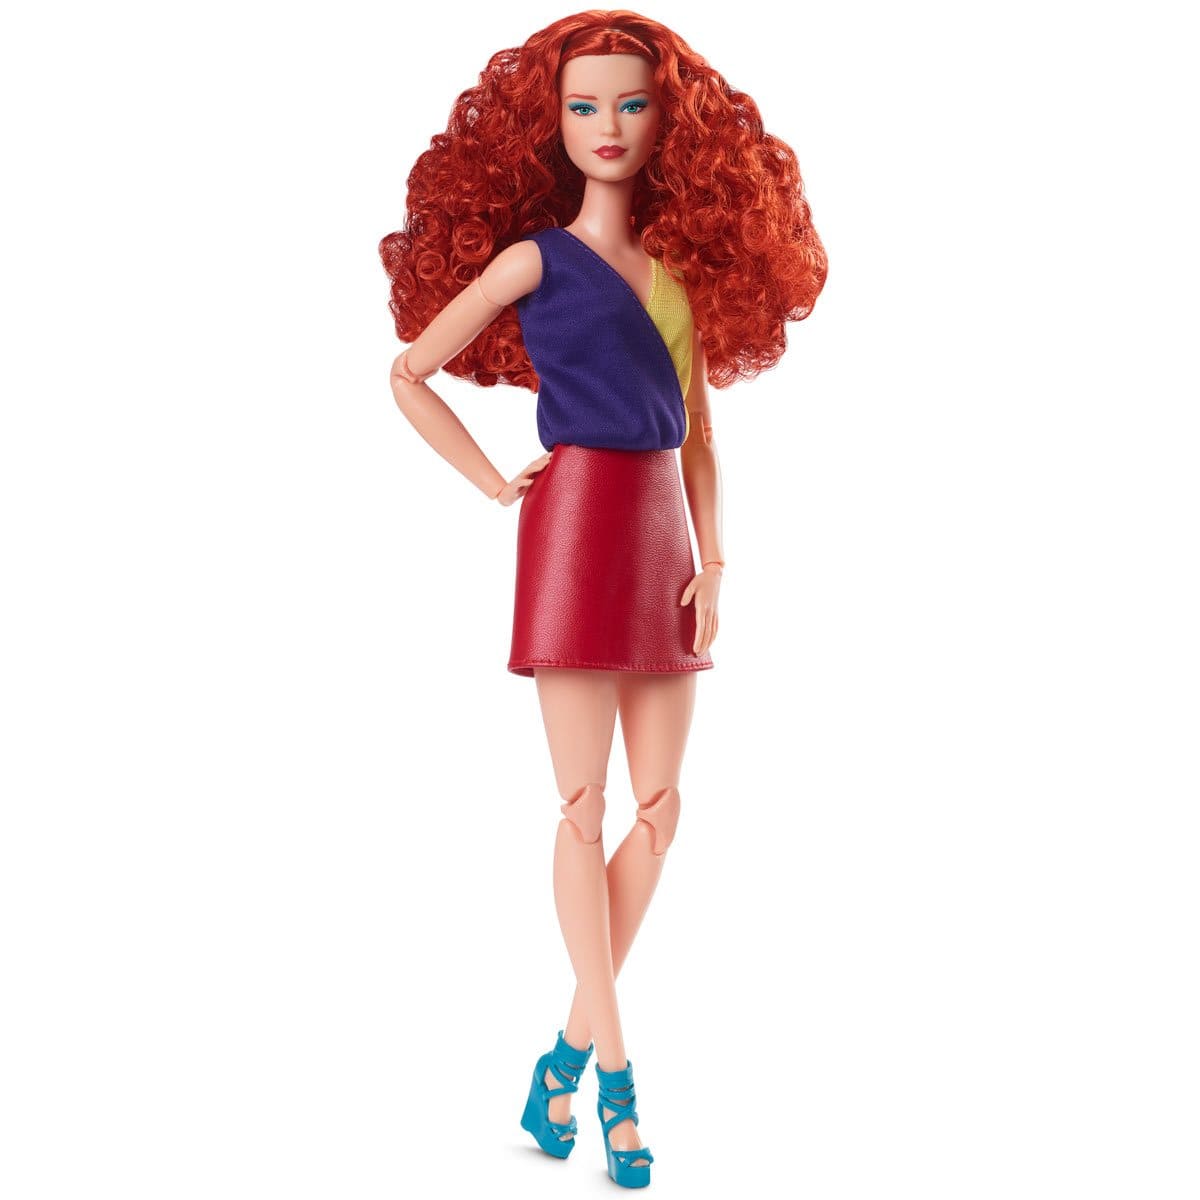 Barbie Looks Doll 13 with Red Hair - Side Pose